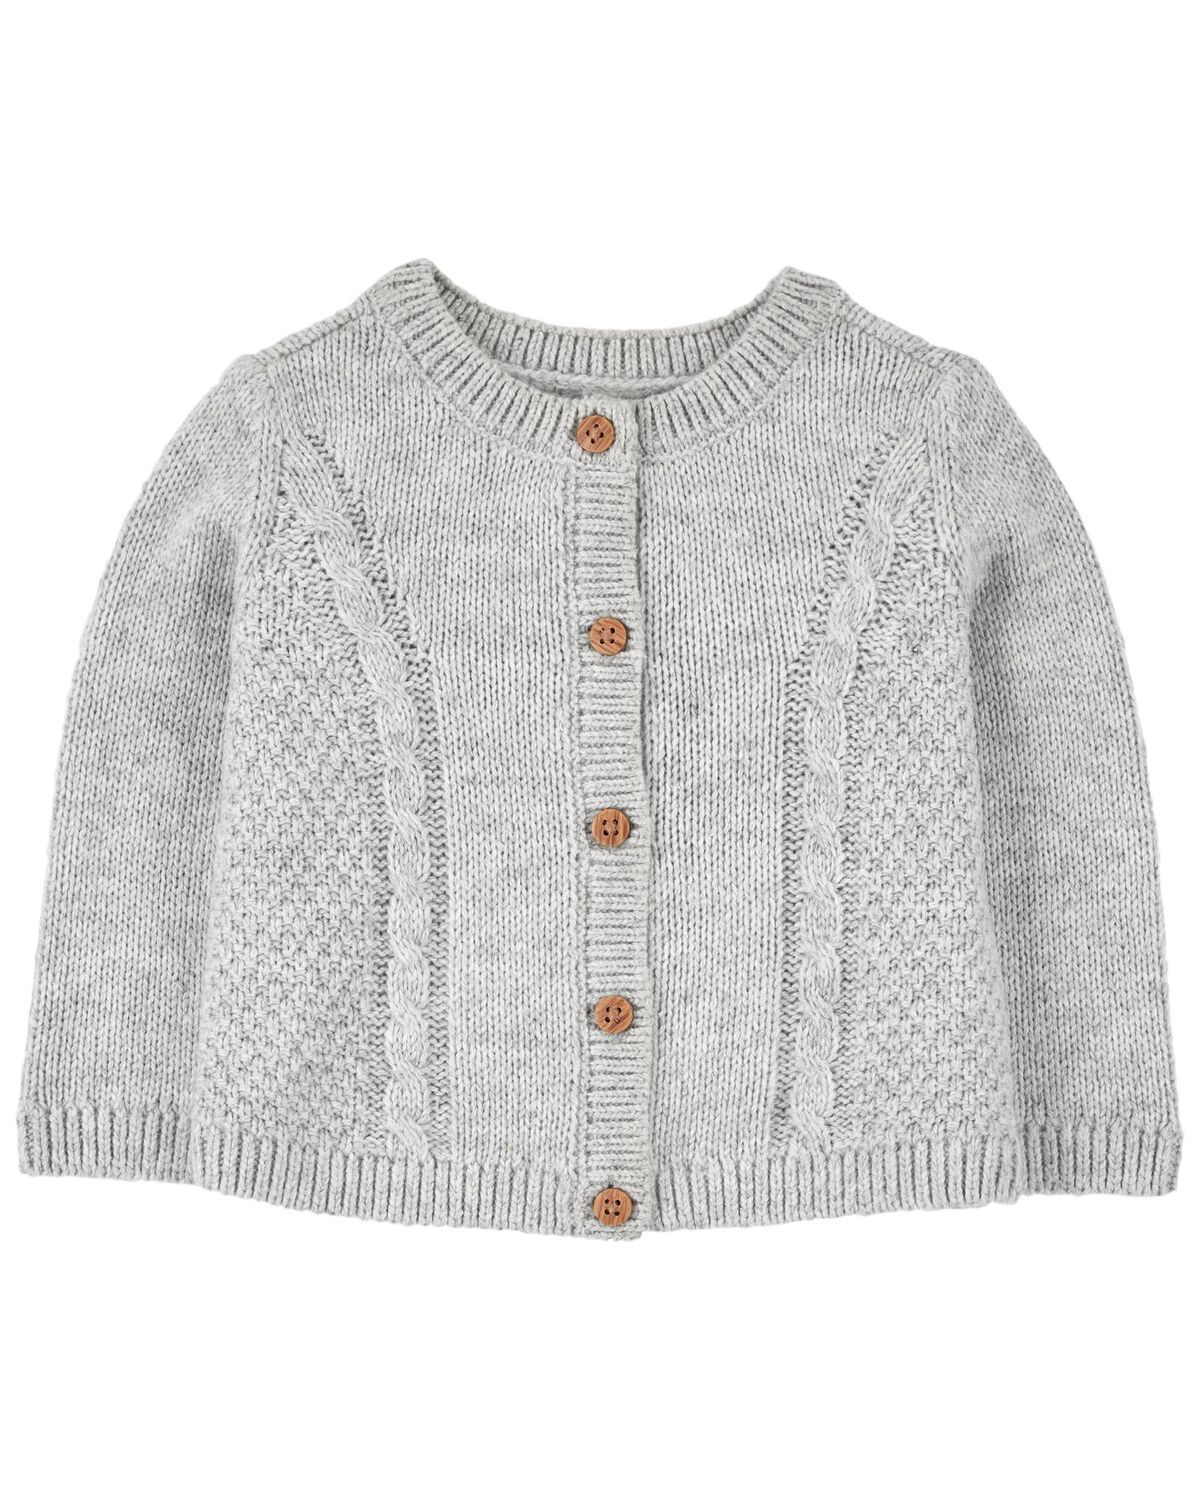 Grey Baby Sweater Knit Button-Front Cardigan | carters.com | Carter's